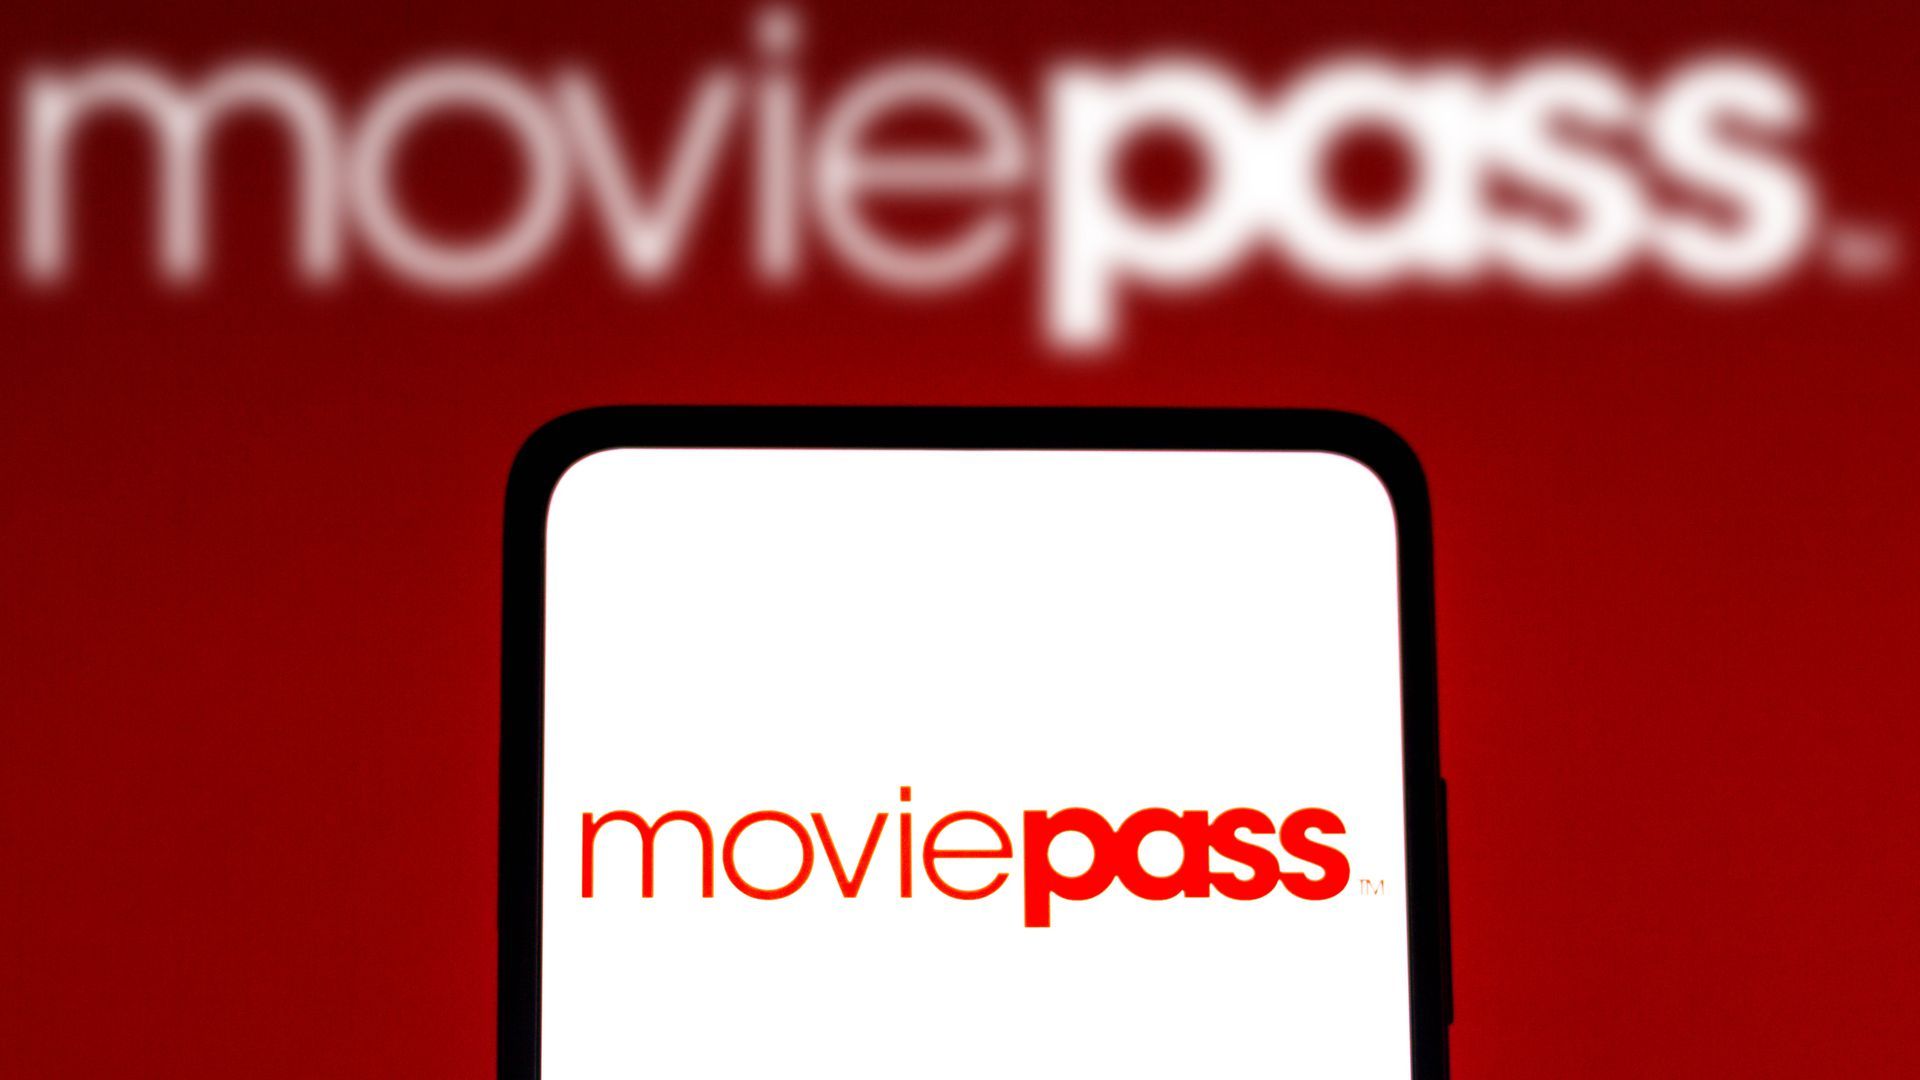 MoviePass logo on a phone in front of a red background with the company logo.